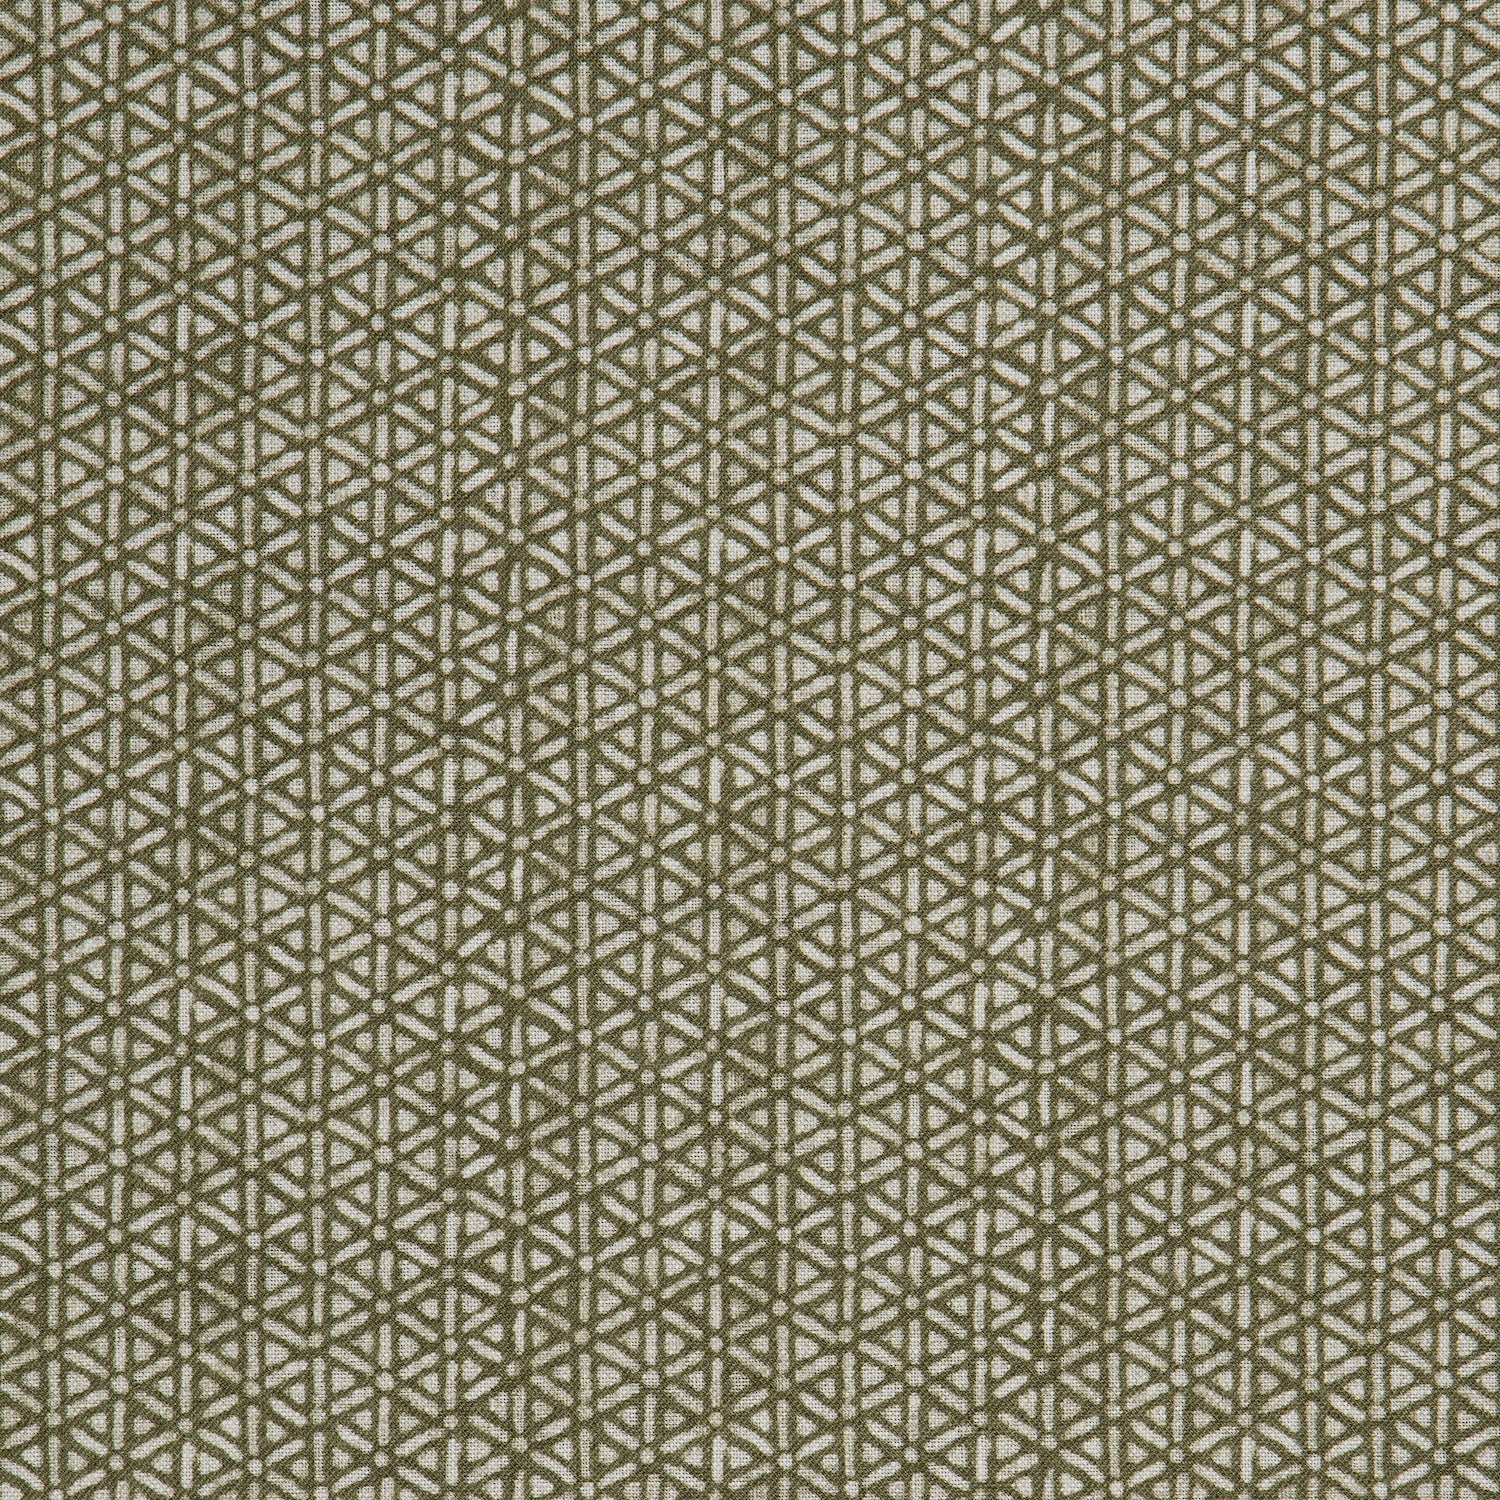 Detail of a linen fabric in a detailed geometric pattern in white on an olive field.